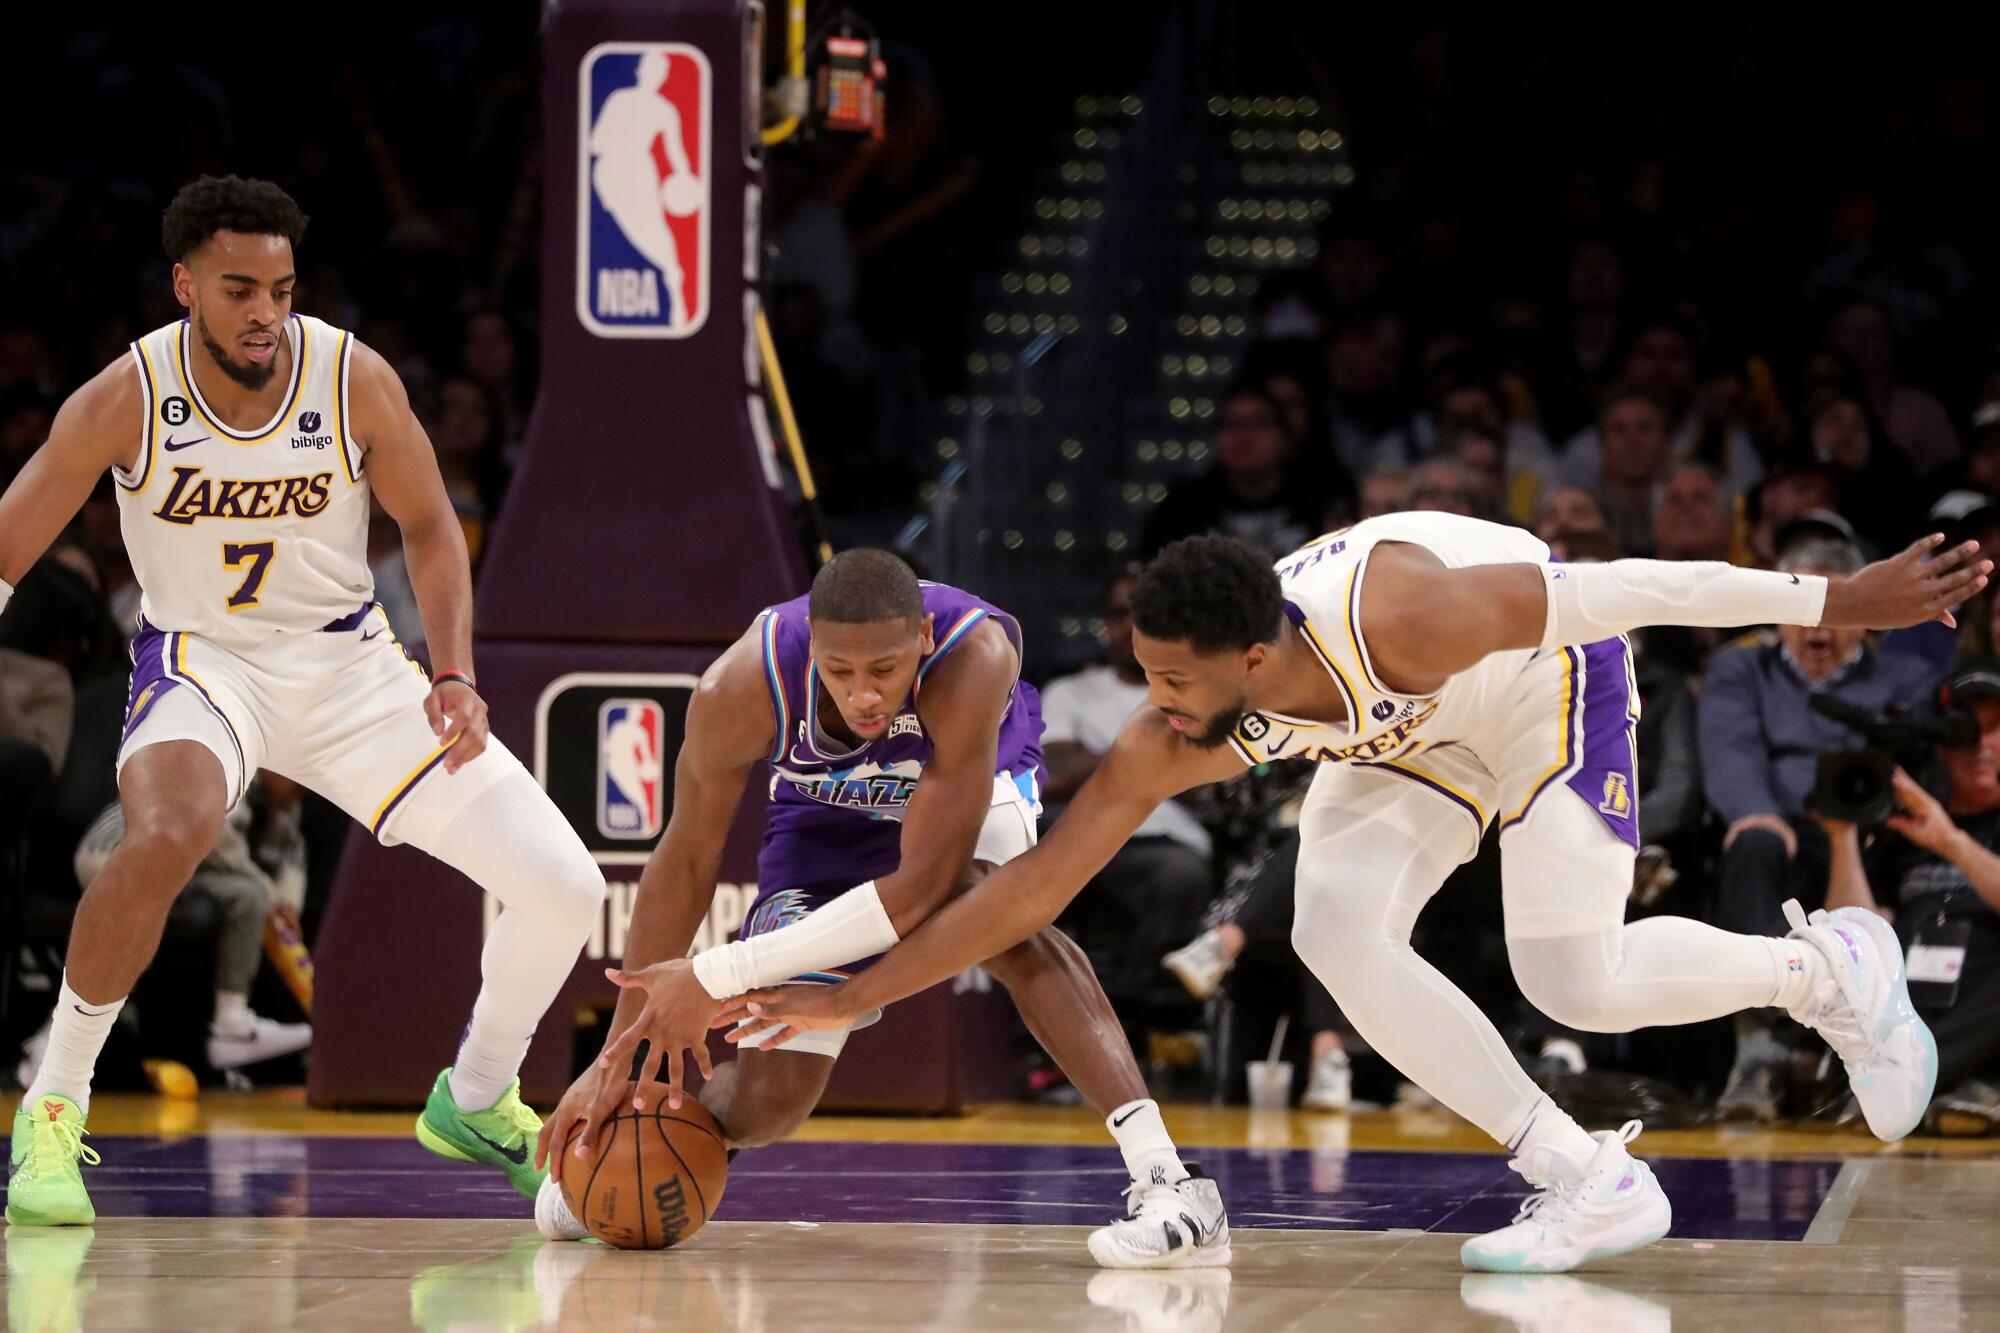 Lakers guard Malik Beasley, right, tries to take the ball from Jazz guard Kris Dunn during the fourth quarter Sunday.